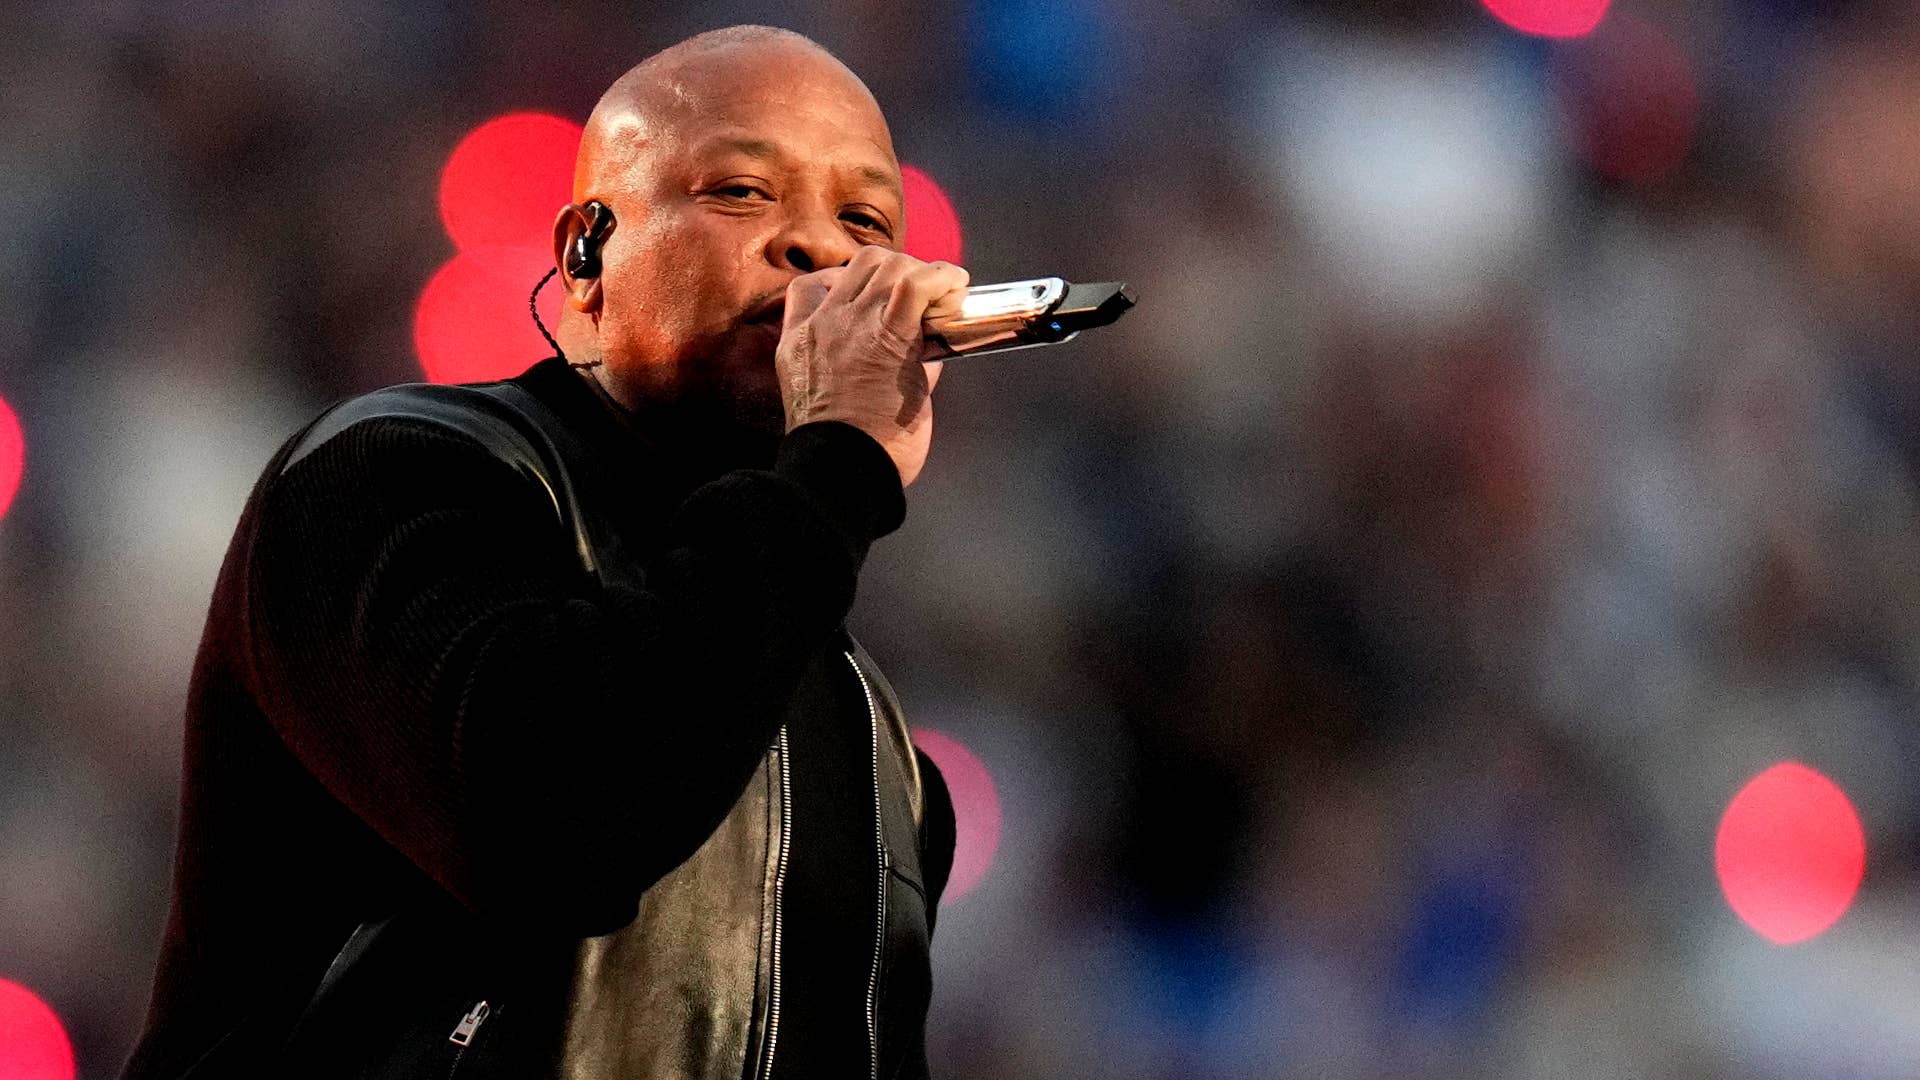 Dr. Dre performs during the half time show of the Super Bowl LVI.